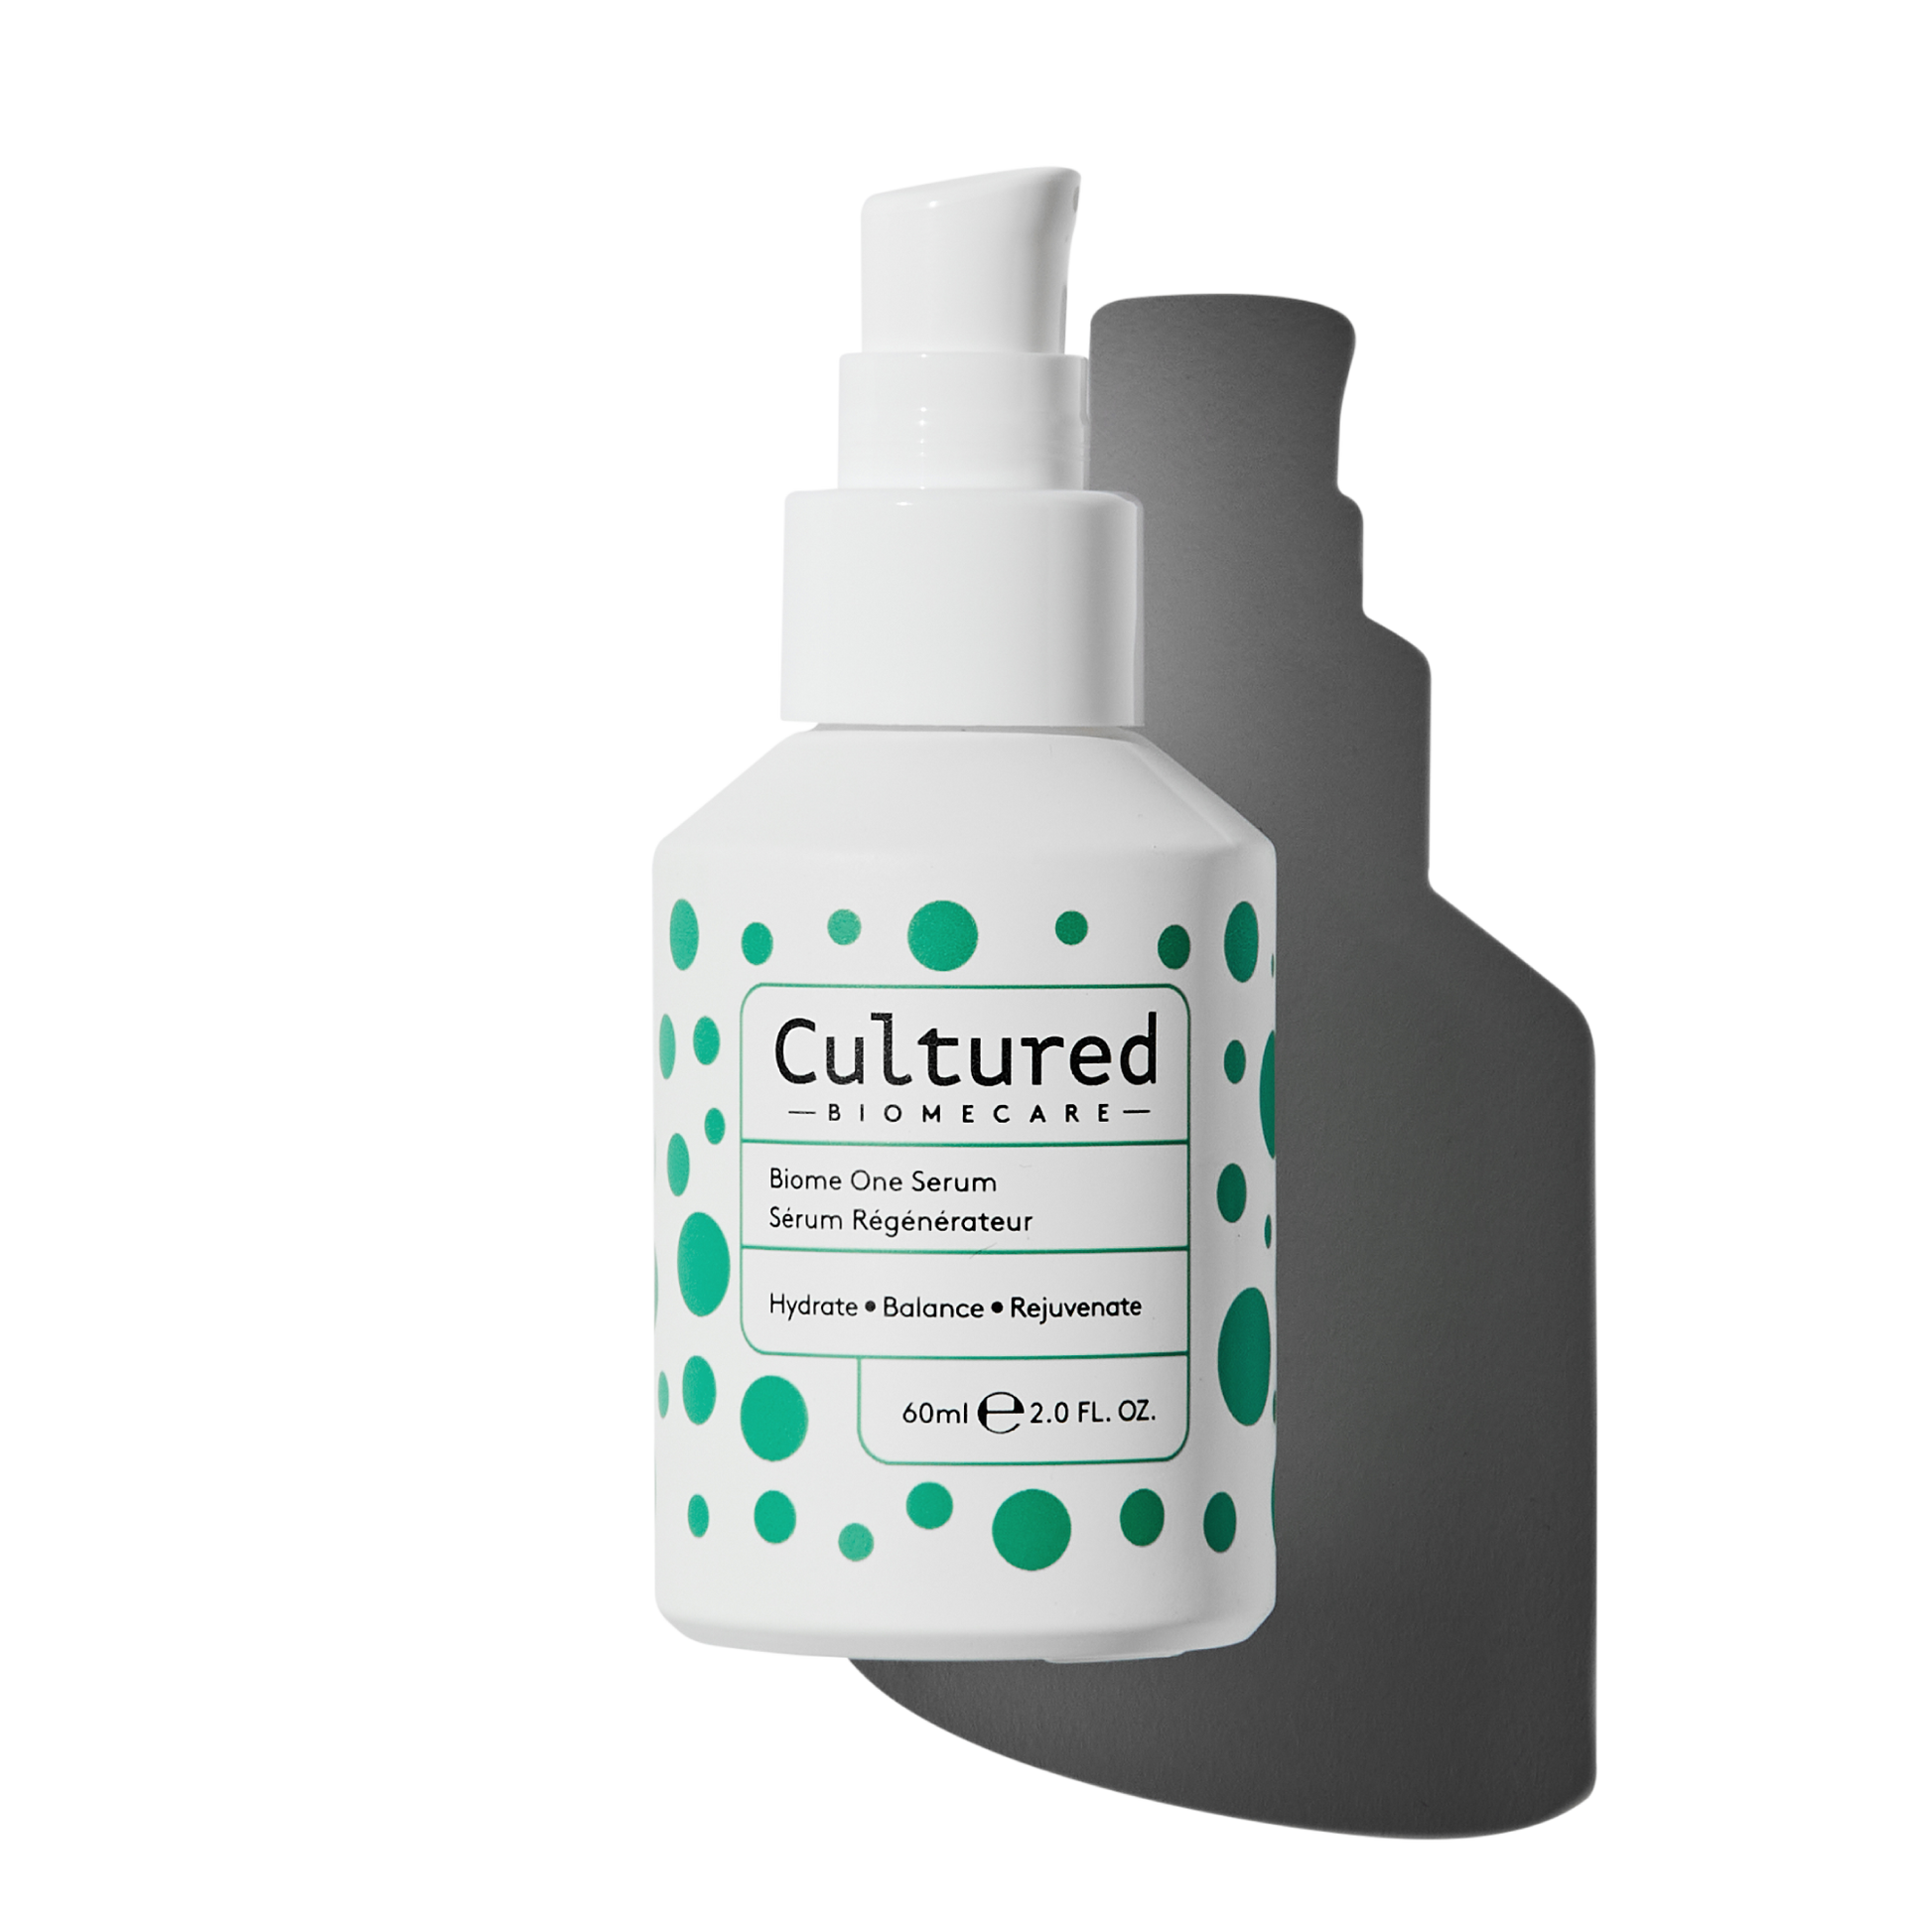 The white Biome One Serum bottle has a pump and features green spots in an assortment of sizes.